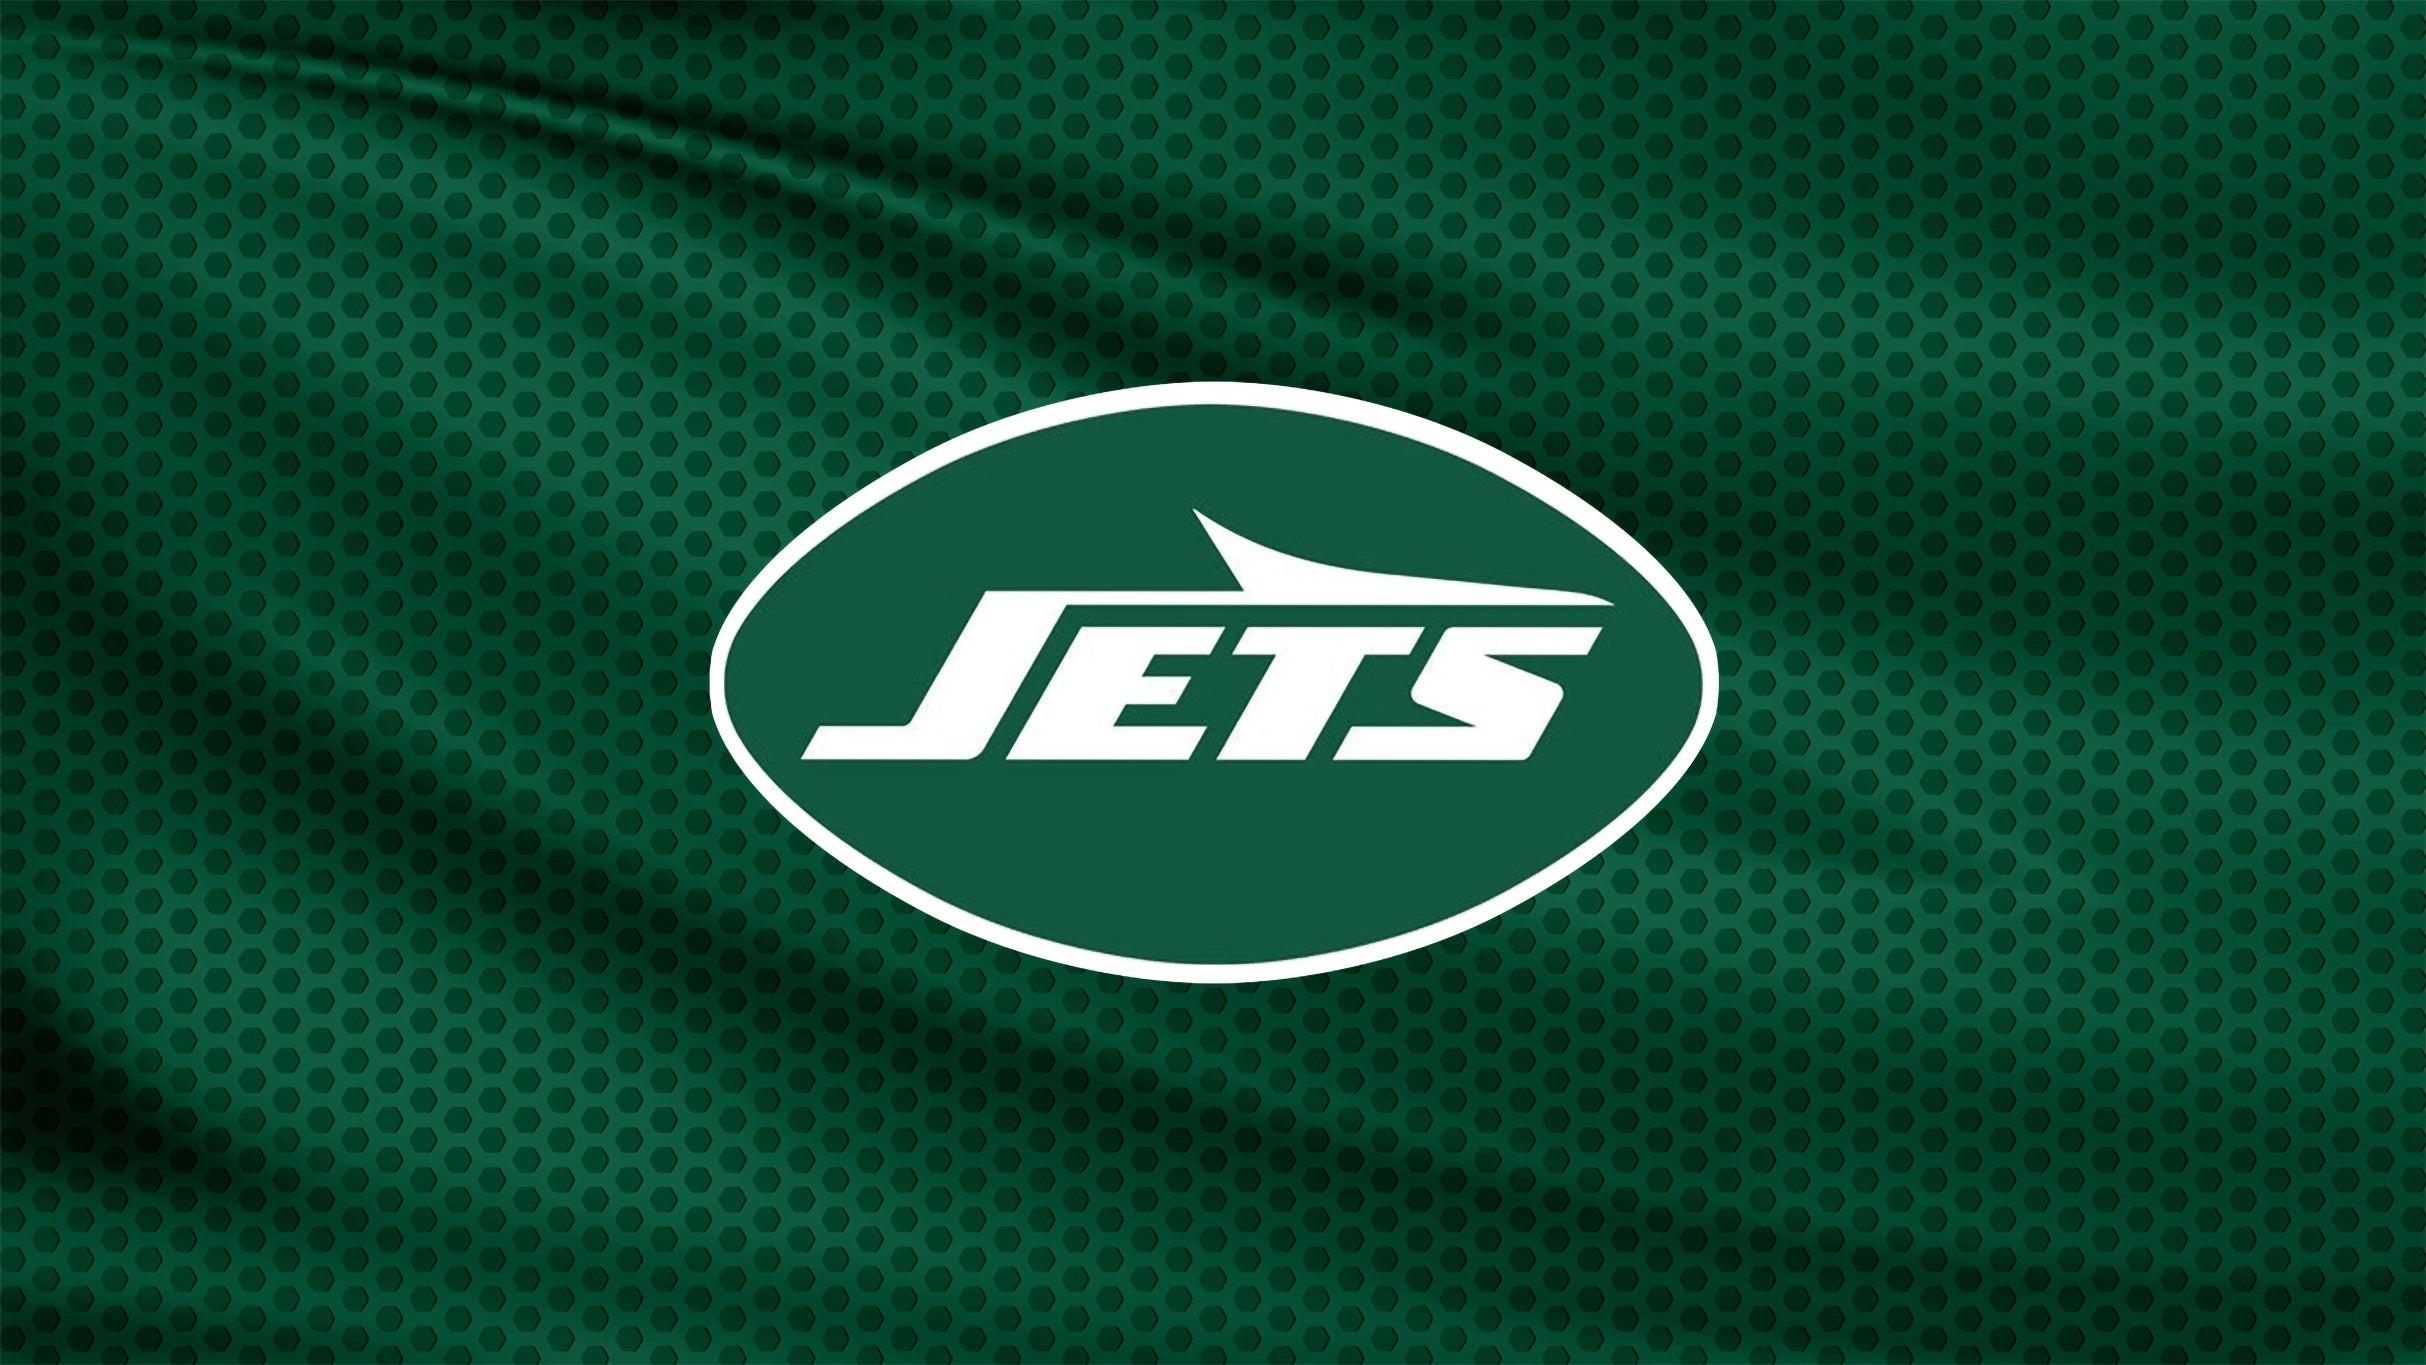 New York Jets vs. Indianapolis Colts in East Rutherford promo photo for VISA presale offer code